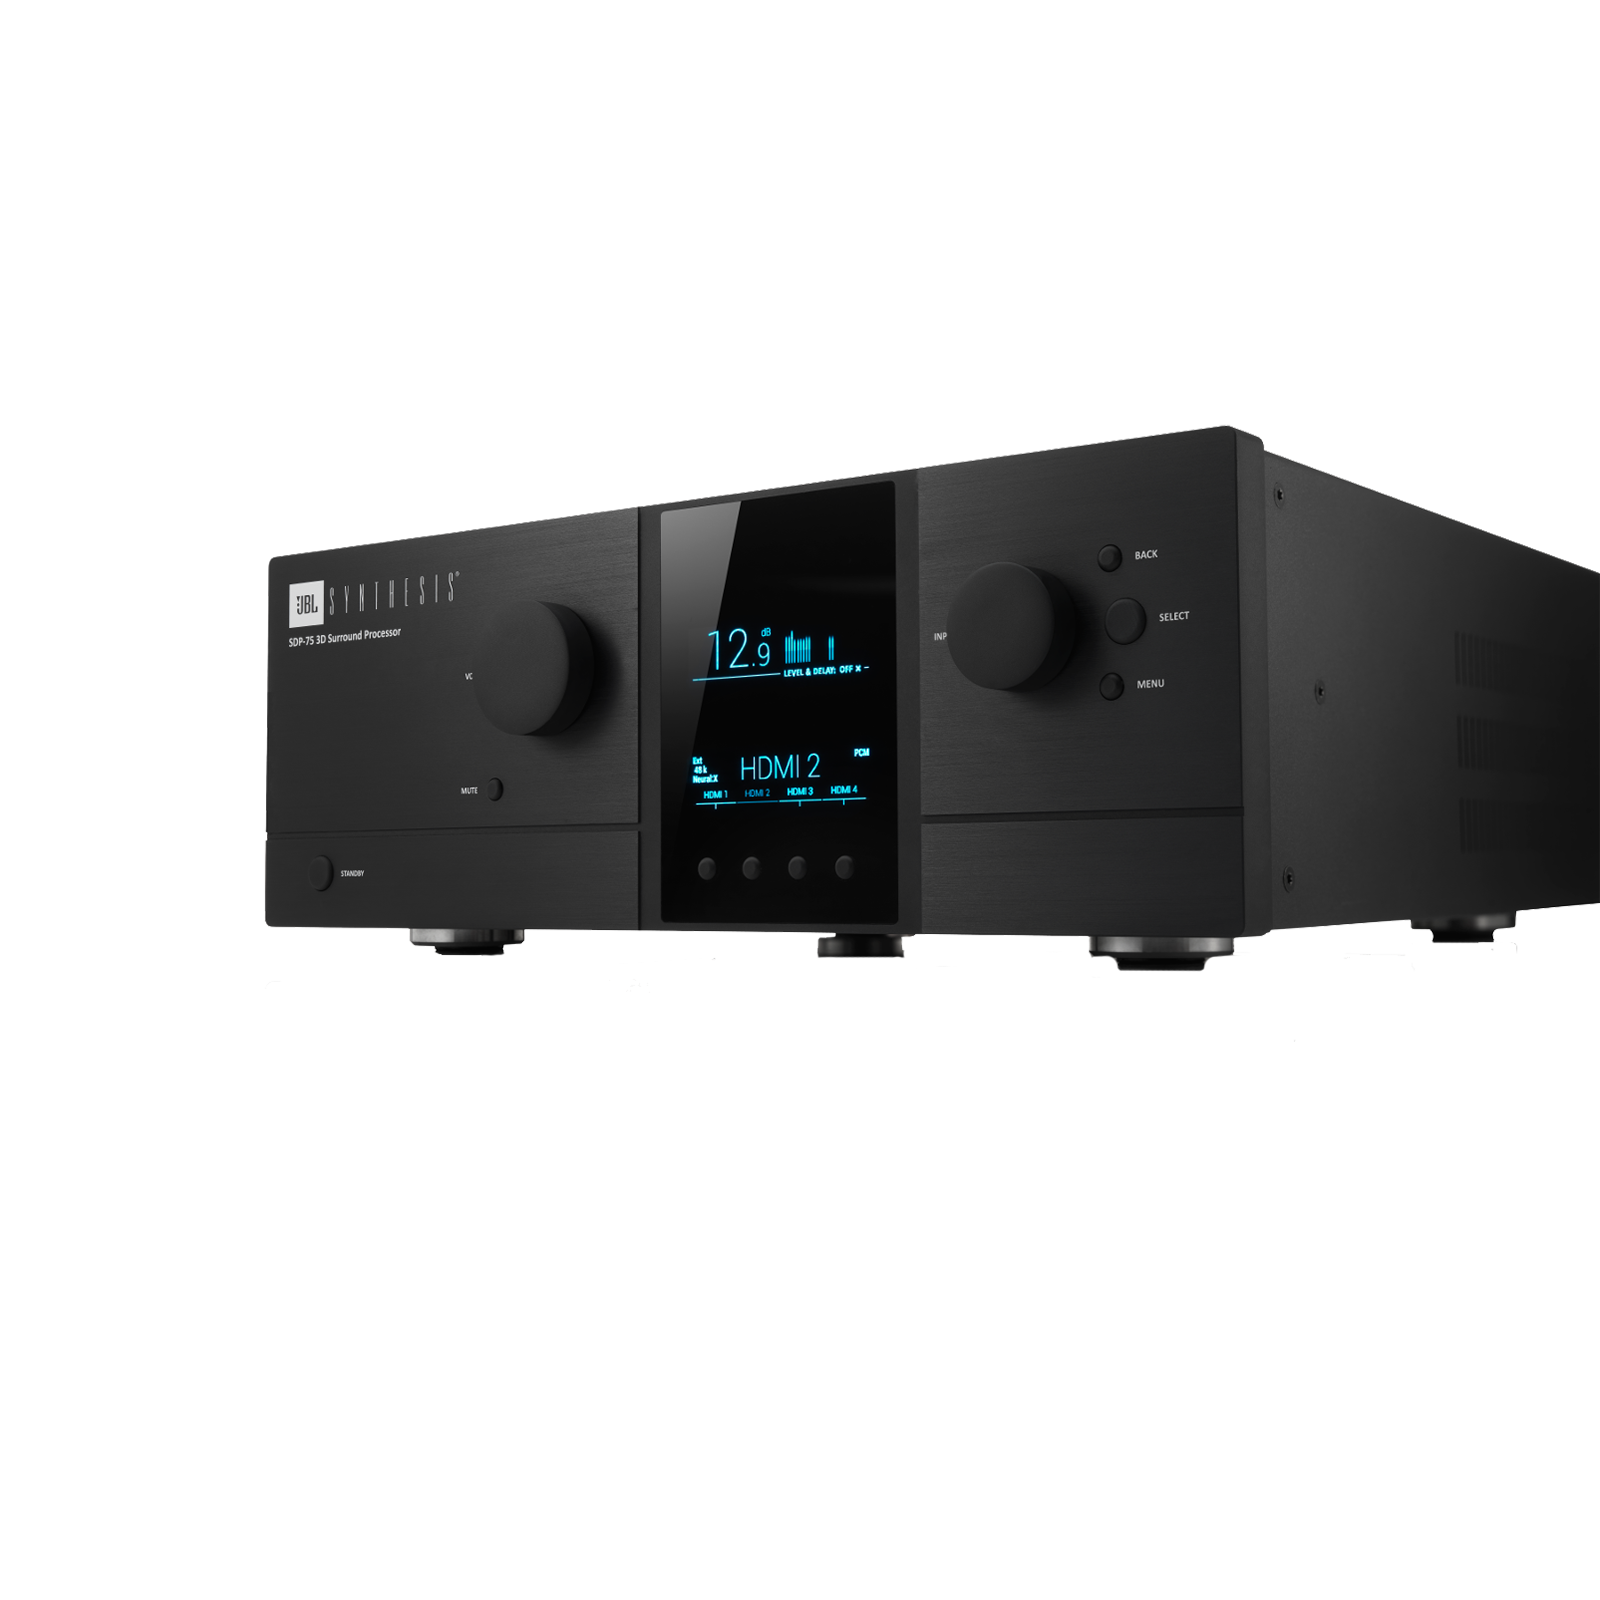 SDP-75 - Black - Luxury Home Cinema Processor Driven by 3D Audio and 4K Ultra HD - Detailshot 1